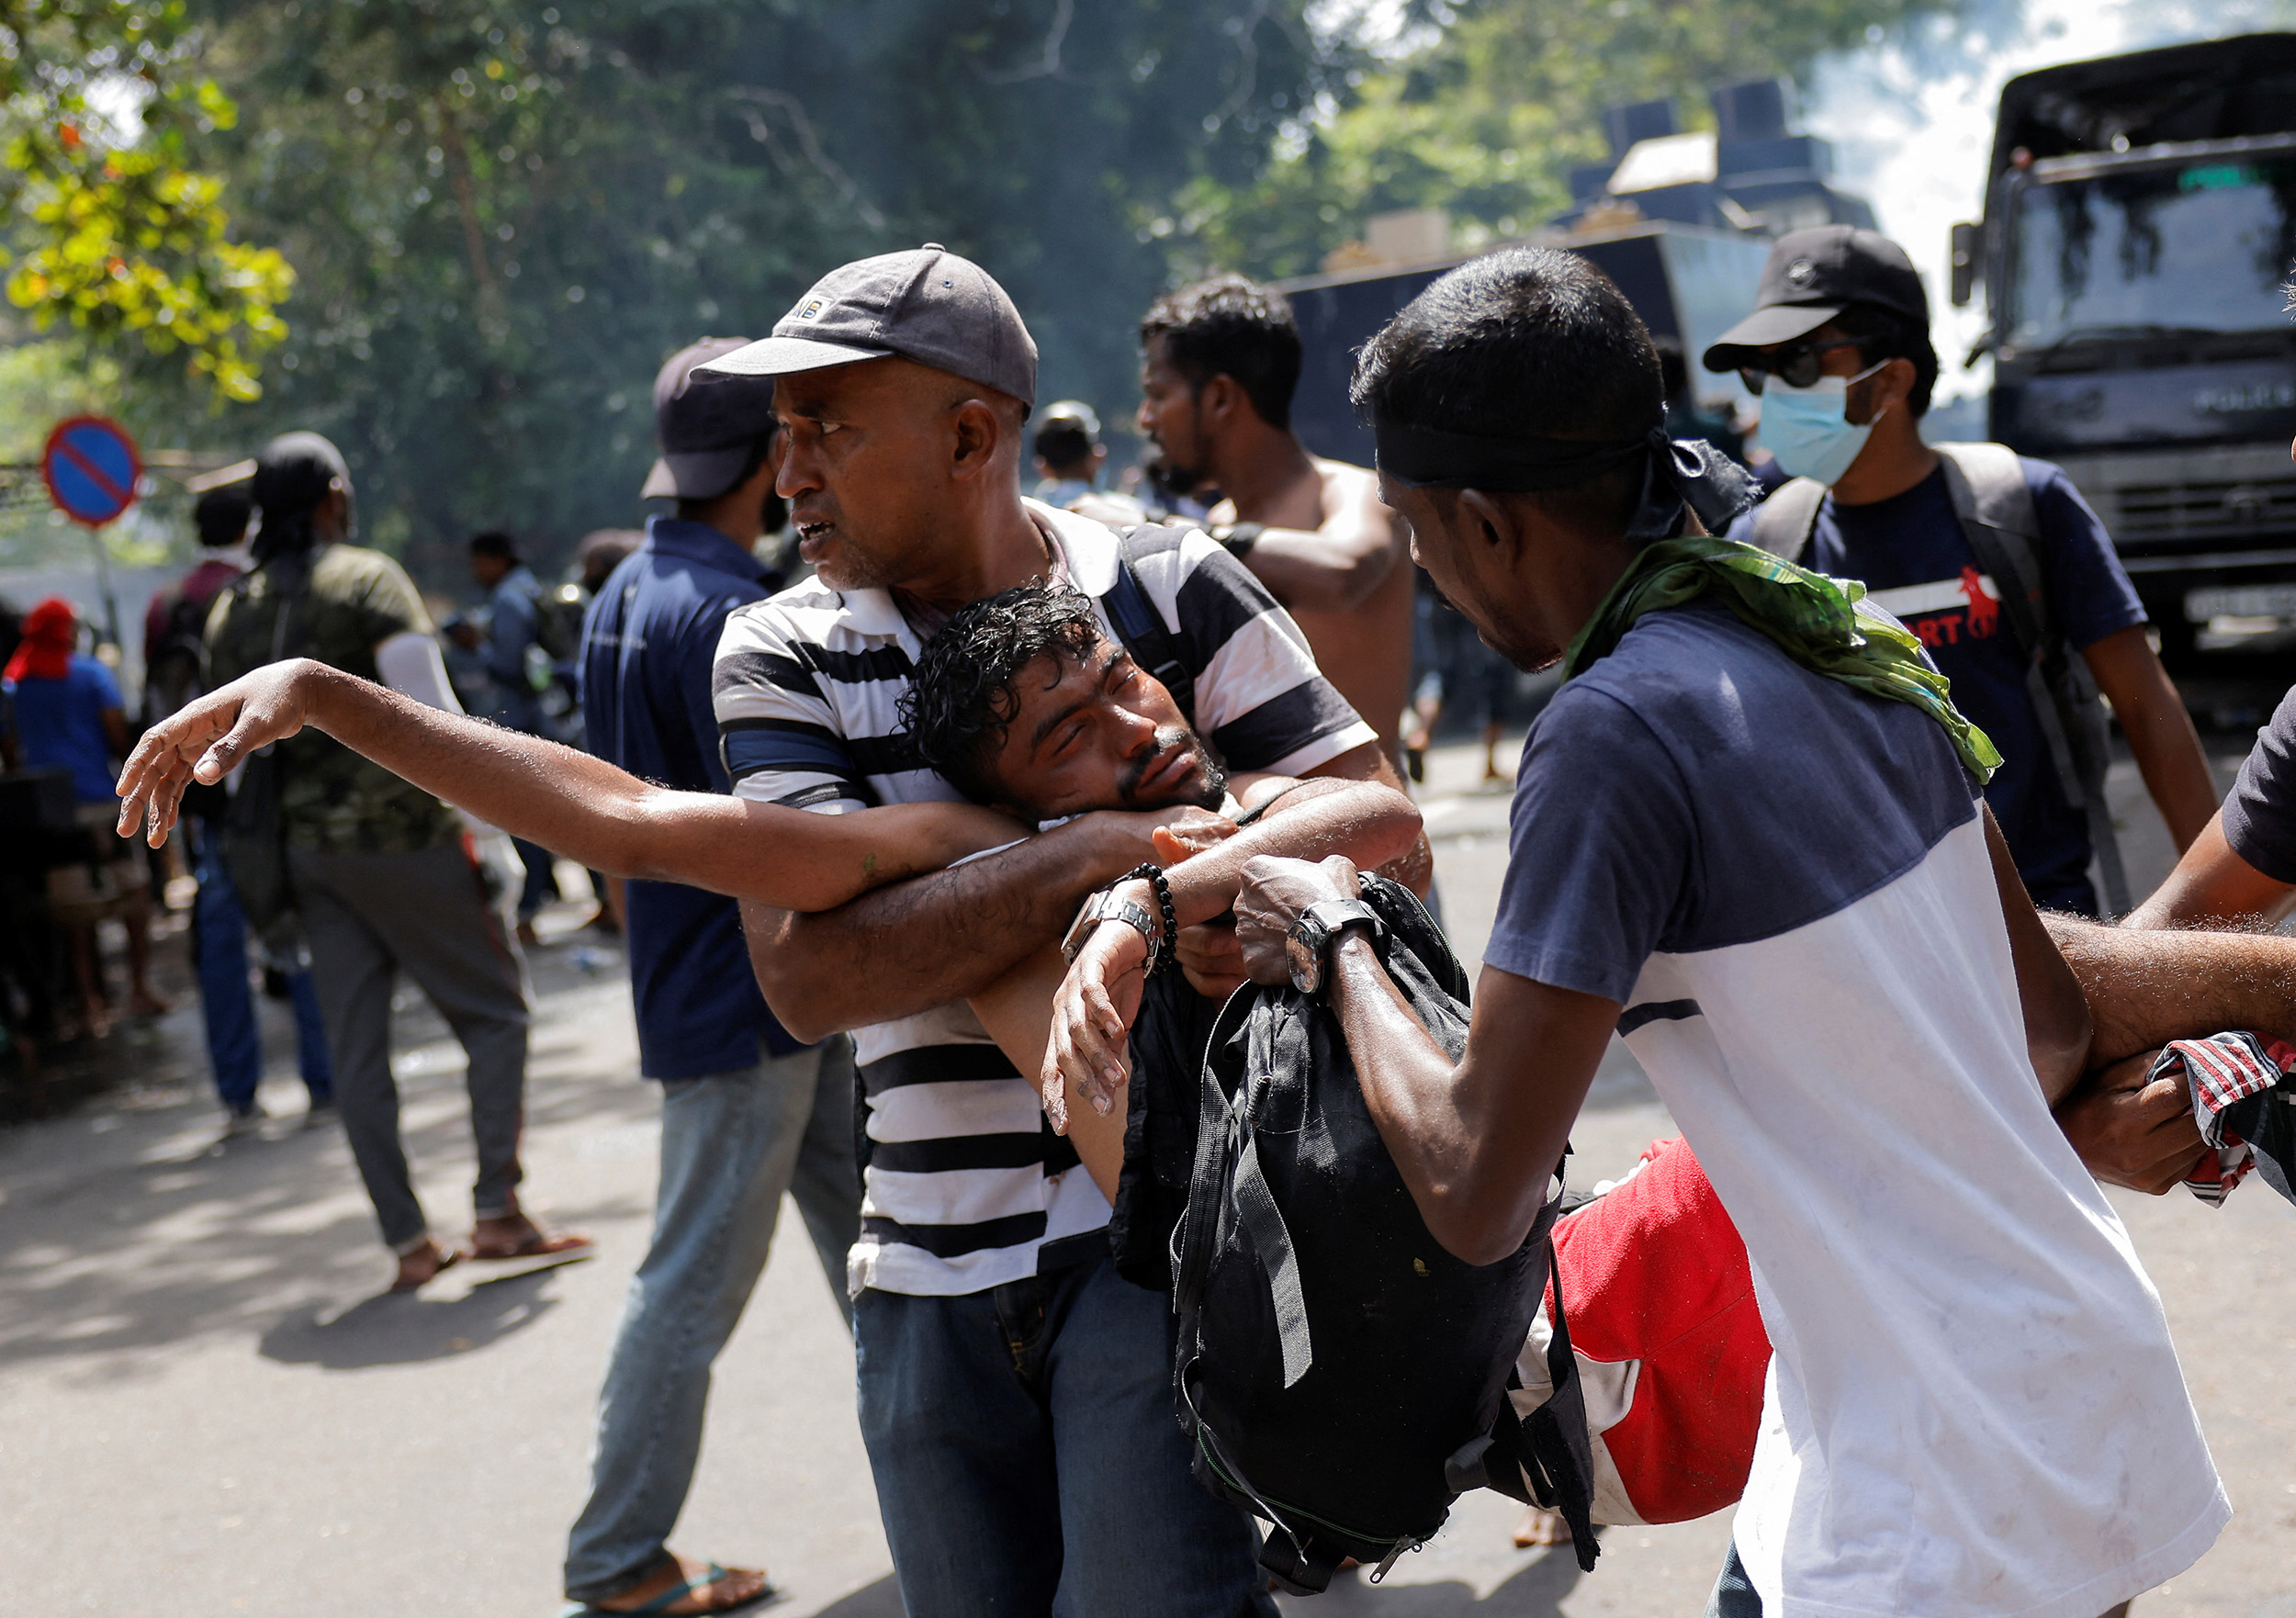 Demonstrators carry an injured person during a clash in front of Sri Lankan Prime Minister Ranil Wickremasinghe's office in Colombo, Sri Lanka, on July 13.